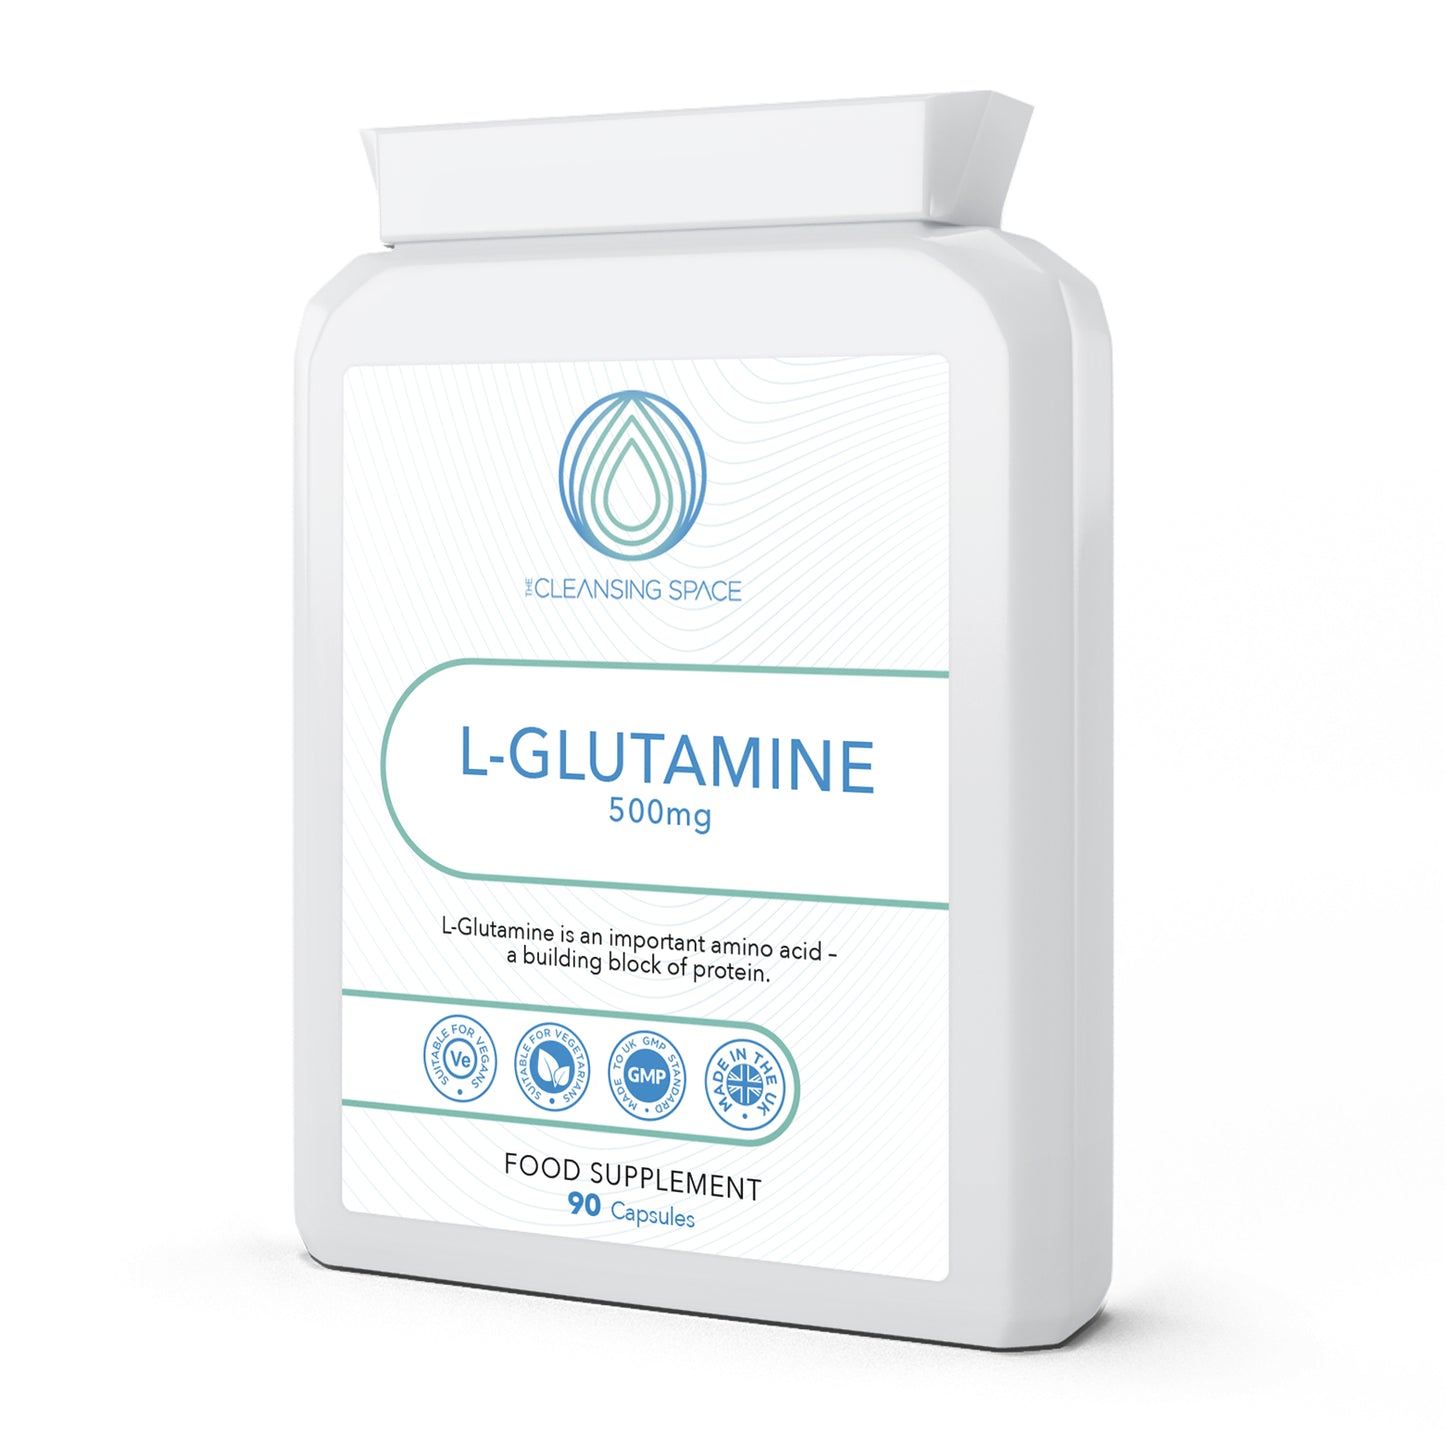 The Cleansing Space | L-Glutamine 500mg | 90 Capsules